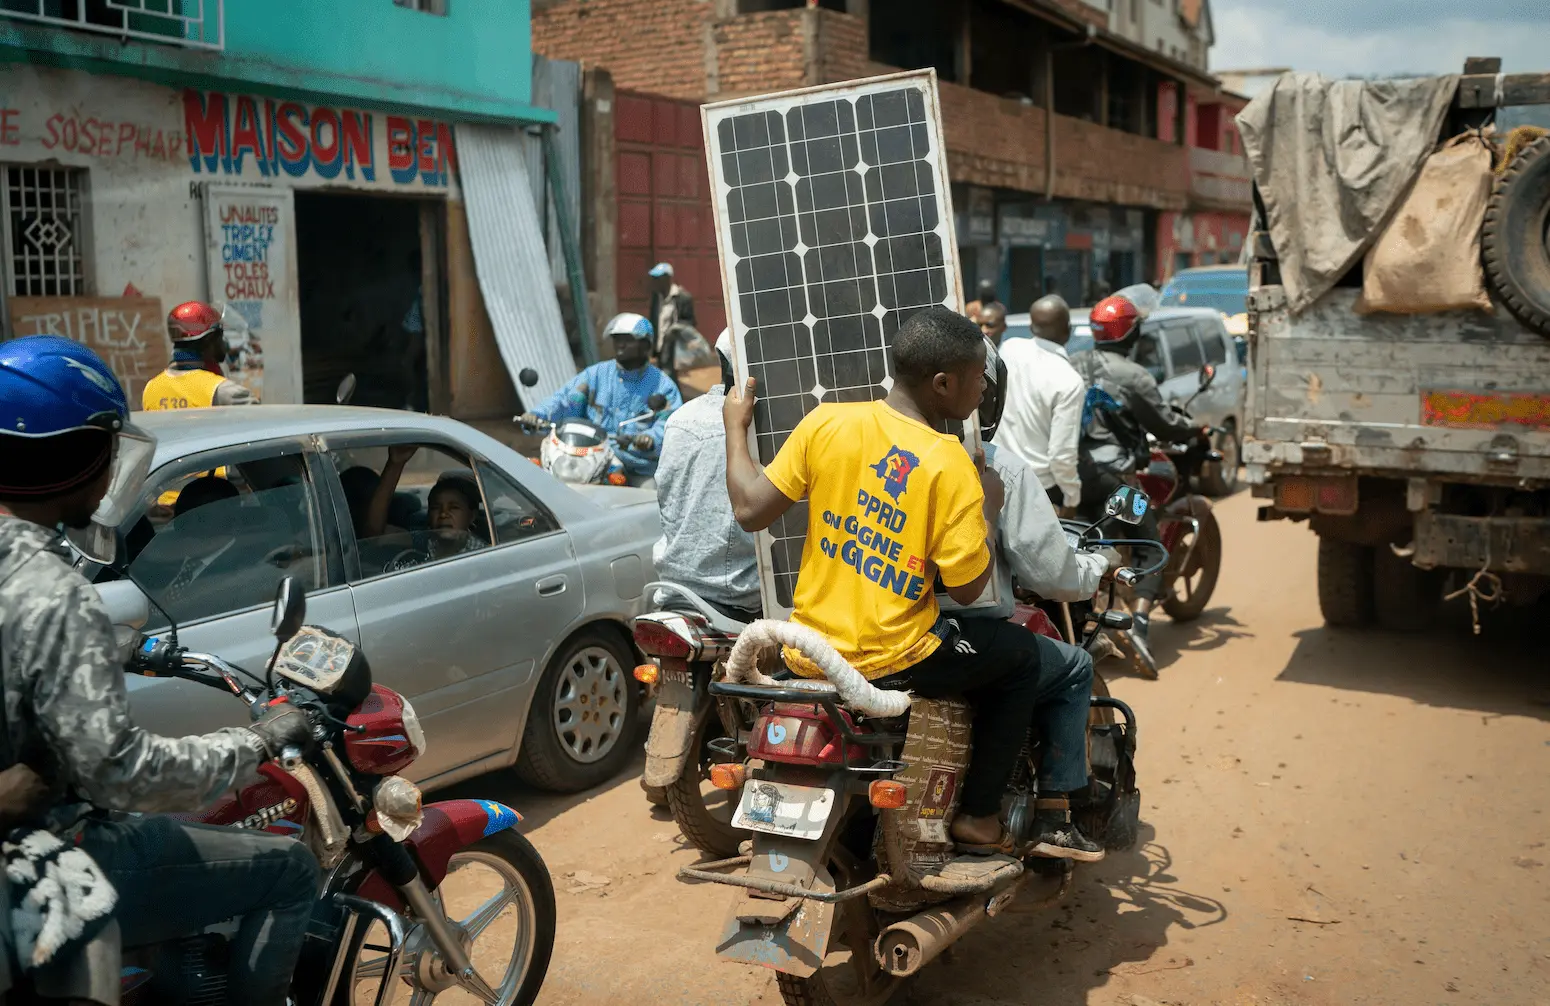 A motorcyclist transports a solar panel in dense traffic in the megacity of Bukavu in Eastern Congo